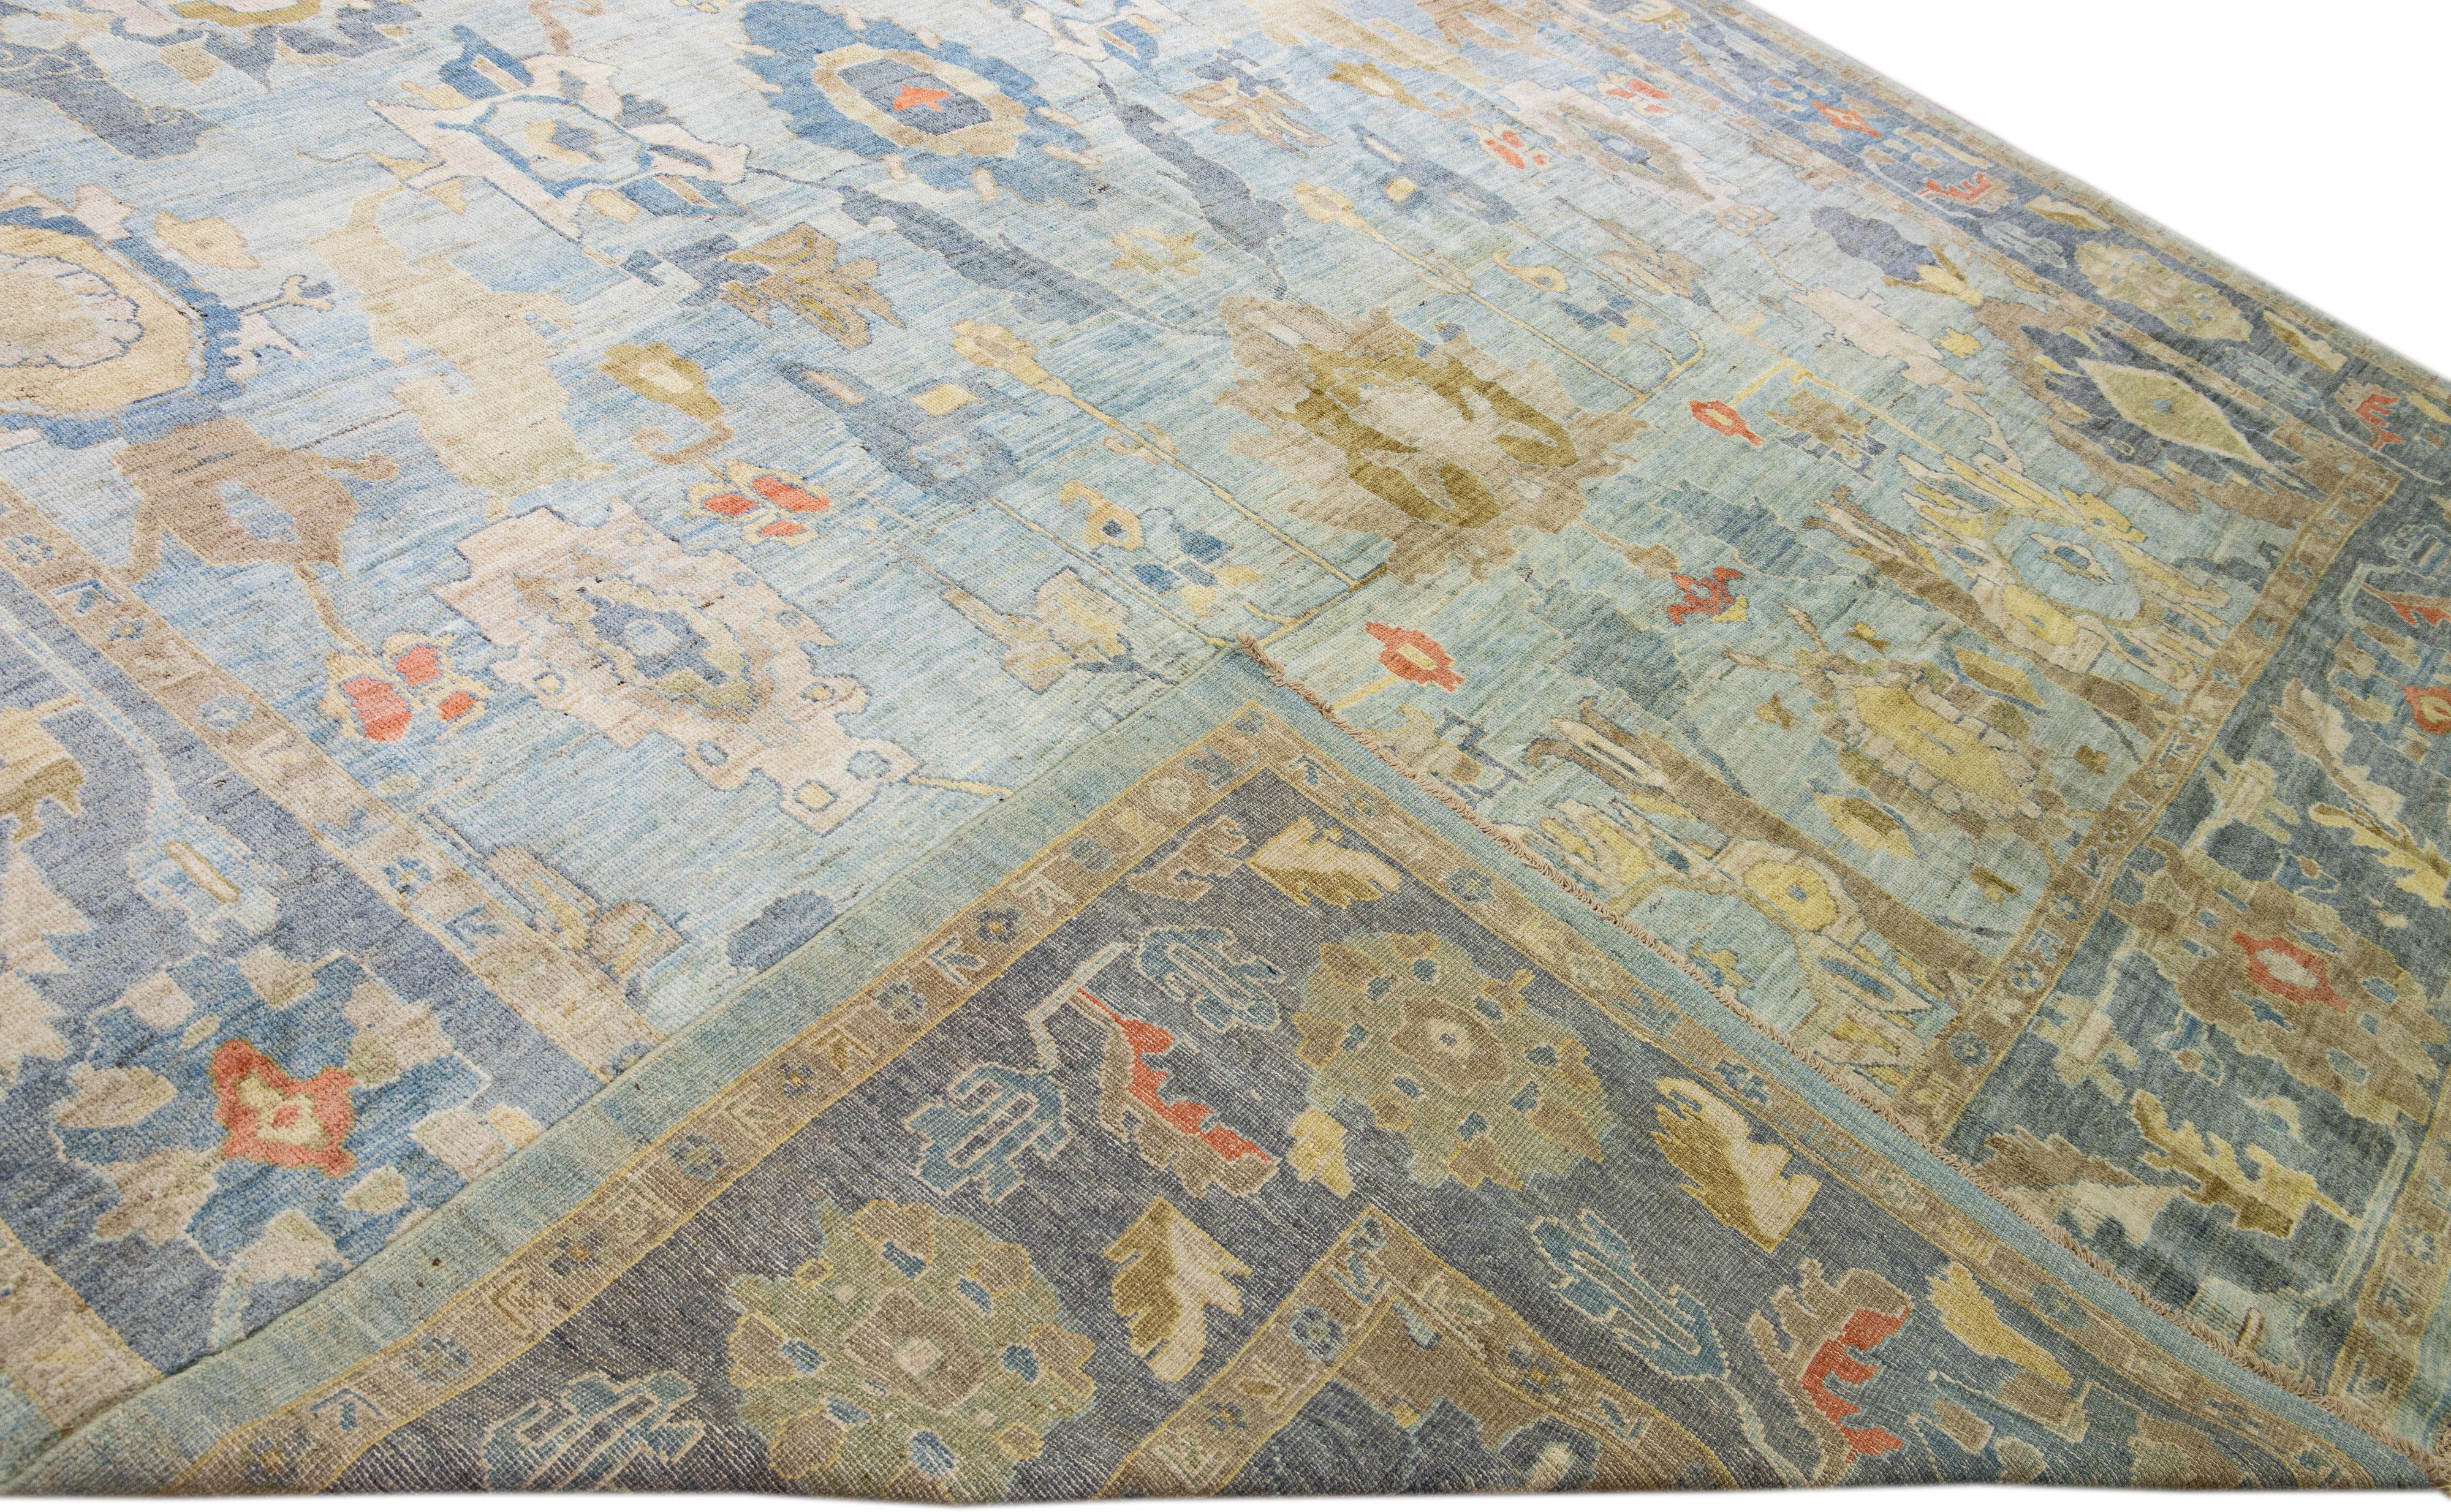 Place size Beautiful modern Sultanabad hand-knotted wool rug with a blue field. This Sultanabad rug has multicolor accents in a gorgeous all-over classic floral pattern design.

This rug measures: 13'2